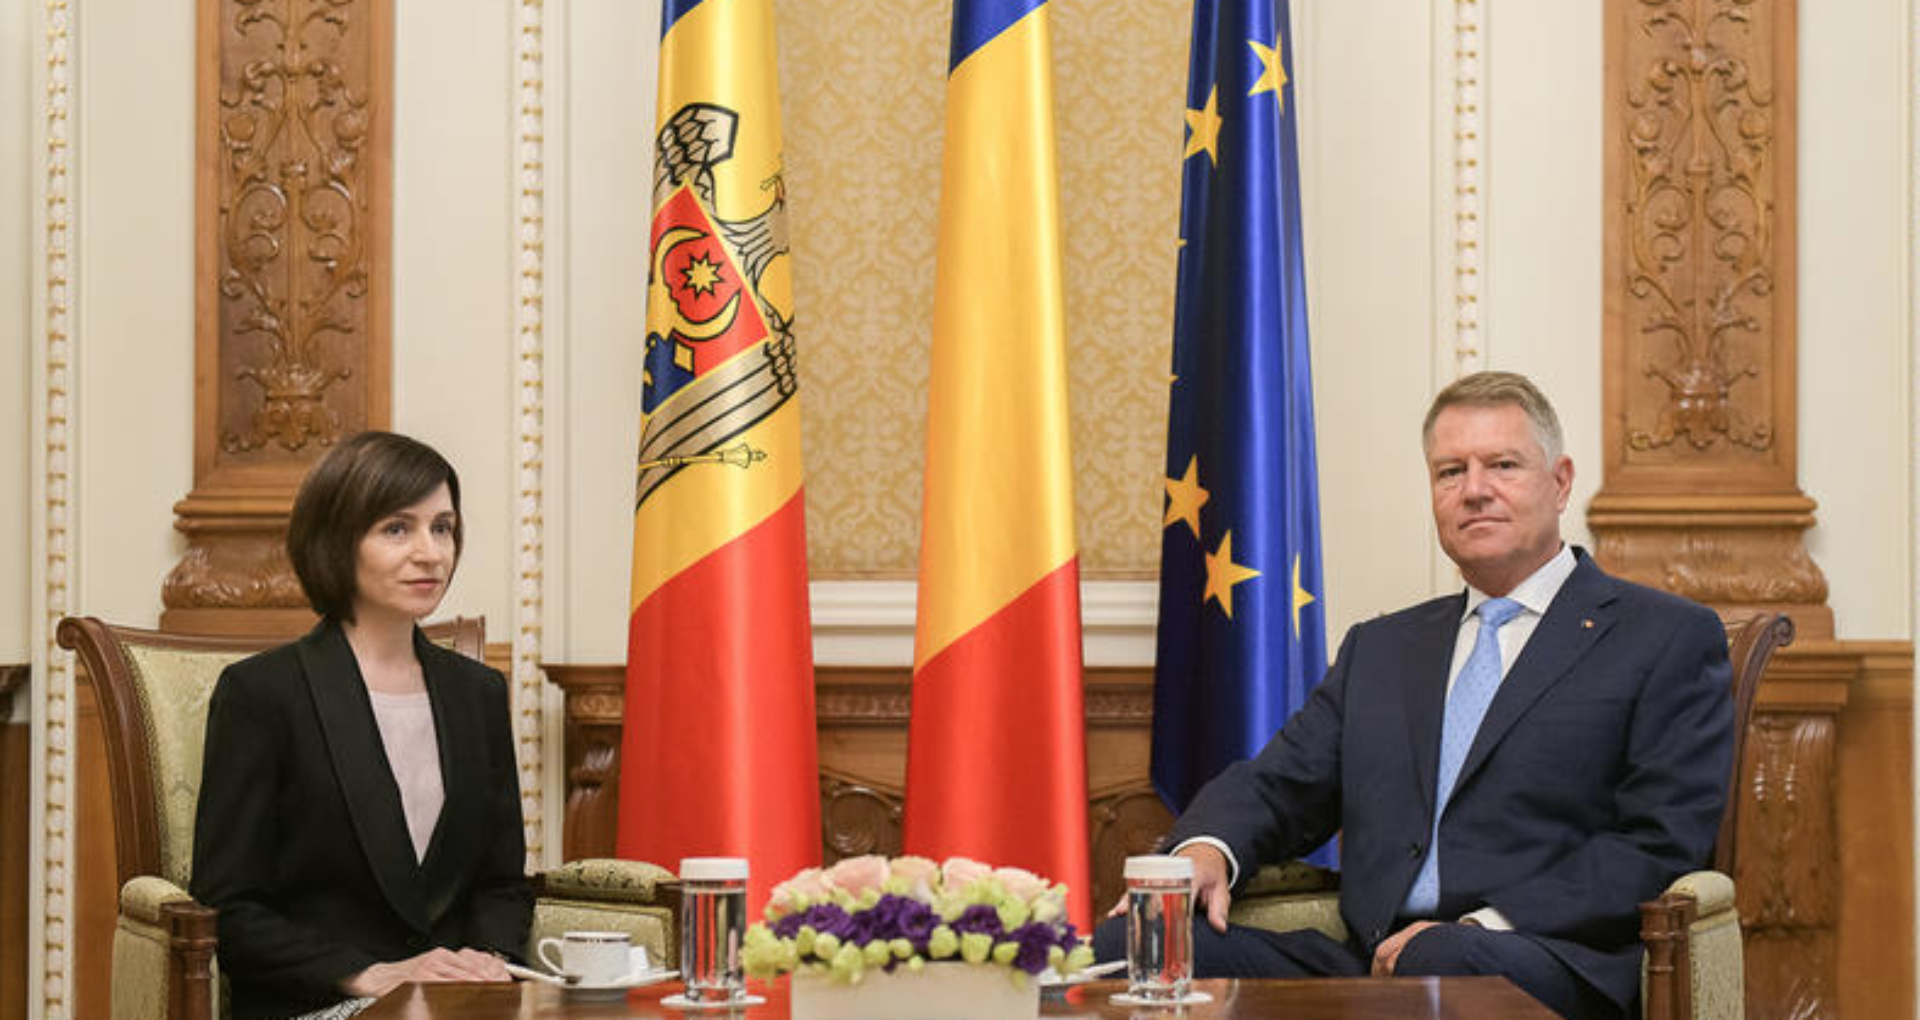 The President of Romania, Klaus Iohannis, is Coming to Moldova